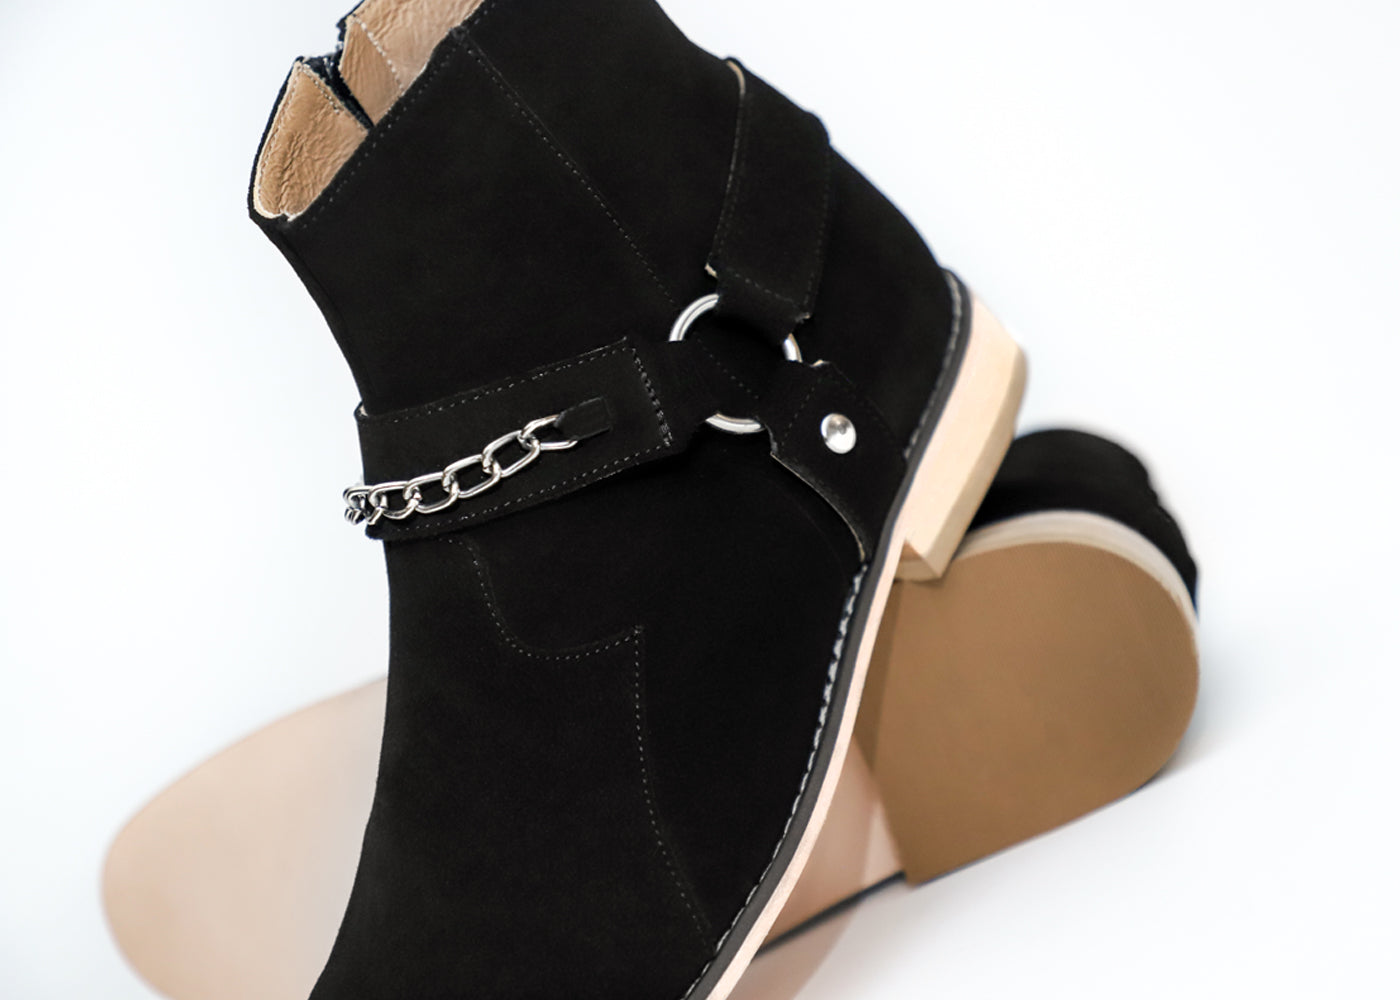 Chelsea Boots 003-N